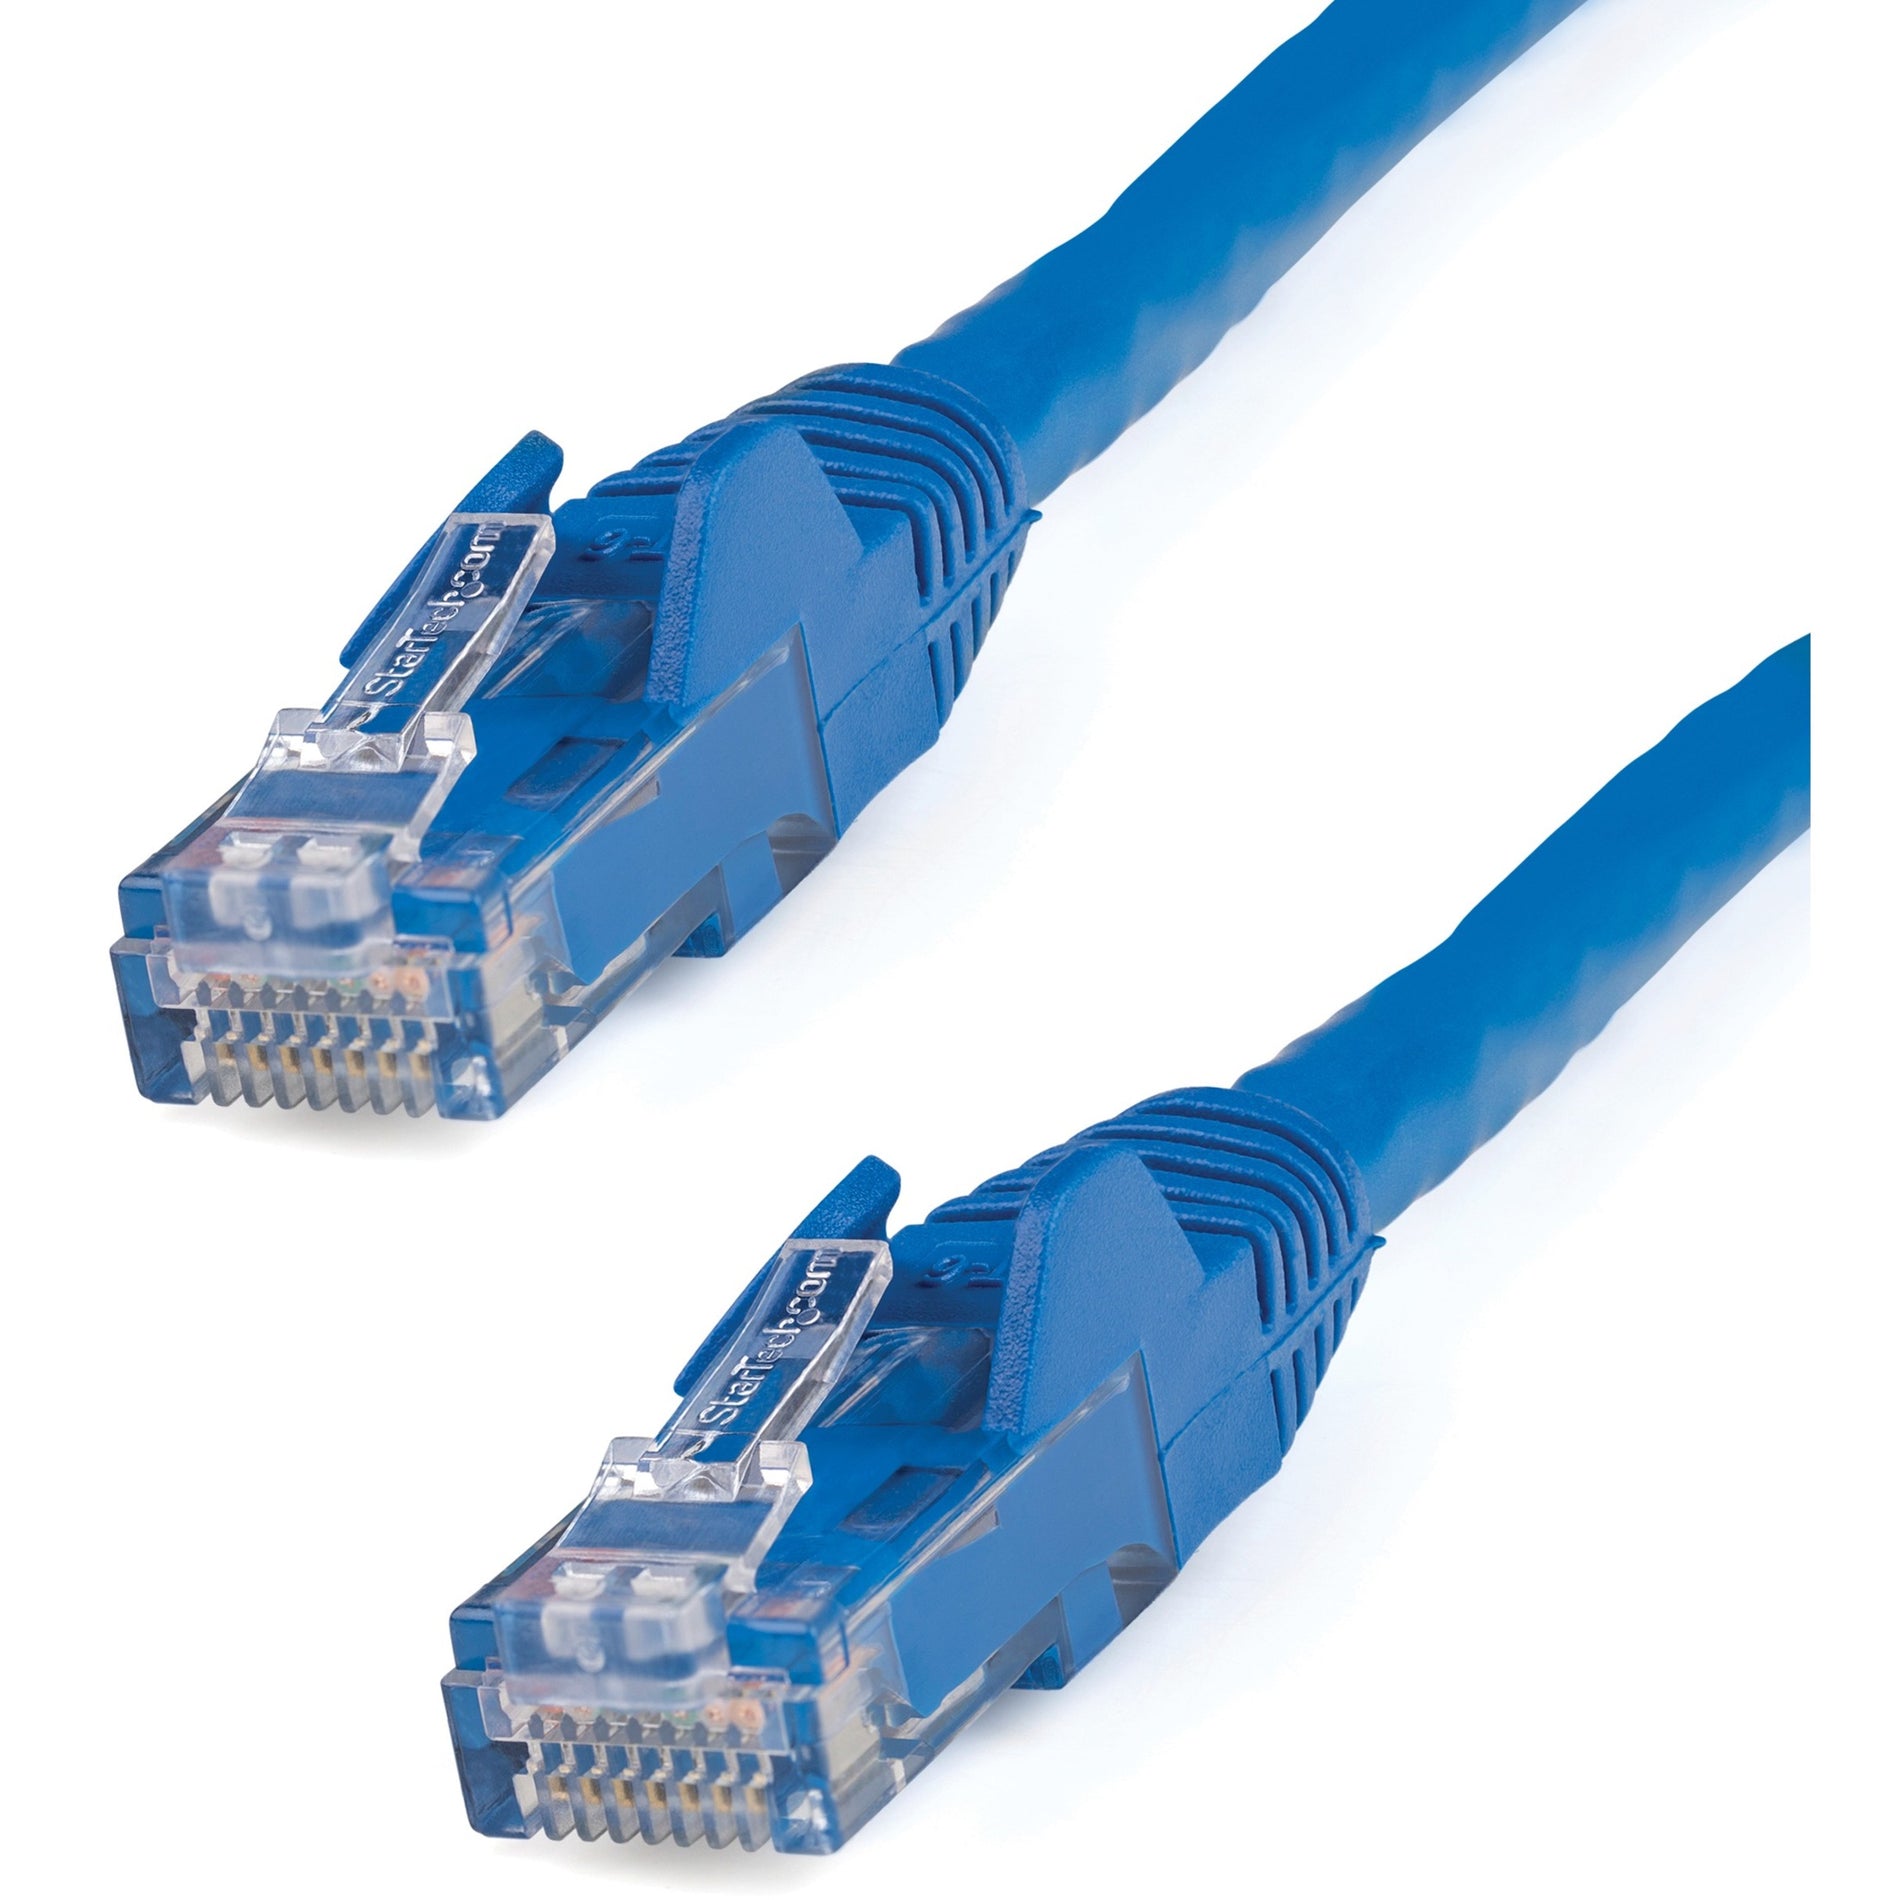 StarTech.com N6PATCH9BL Cat6 Patch Cable, 9 ft Blue Ethernet Cable with Snagless RJ45 Connectors